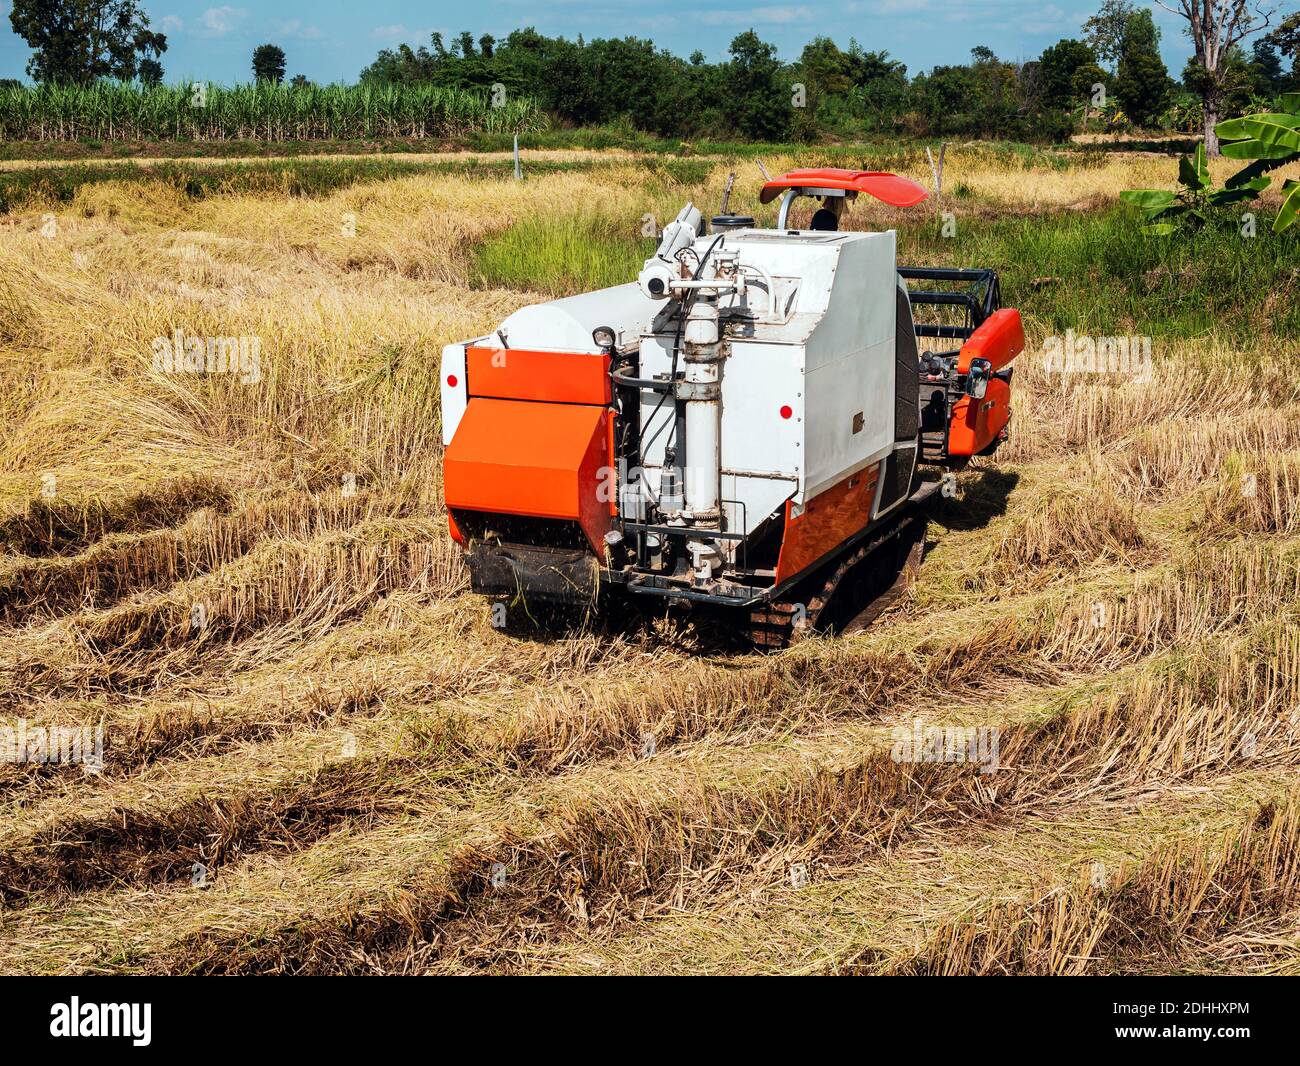 The combine harvester is doing agricultural work in the fields. Stock Photo